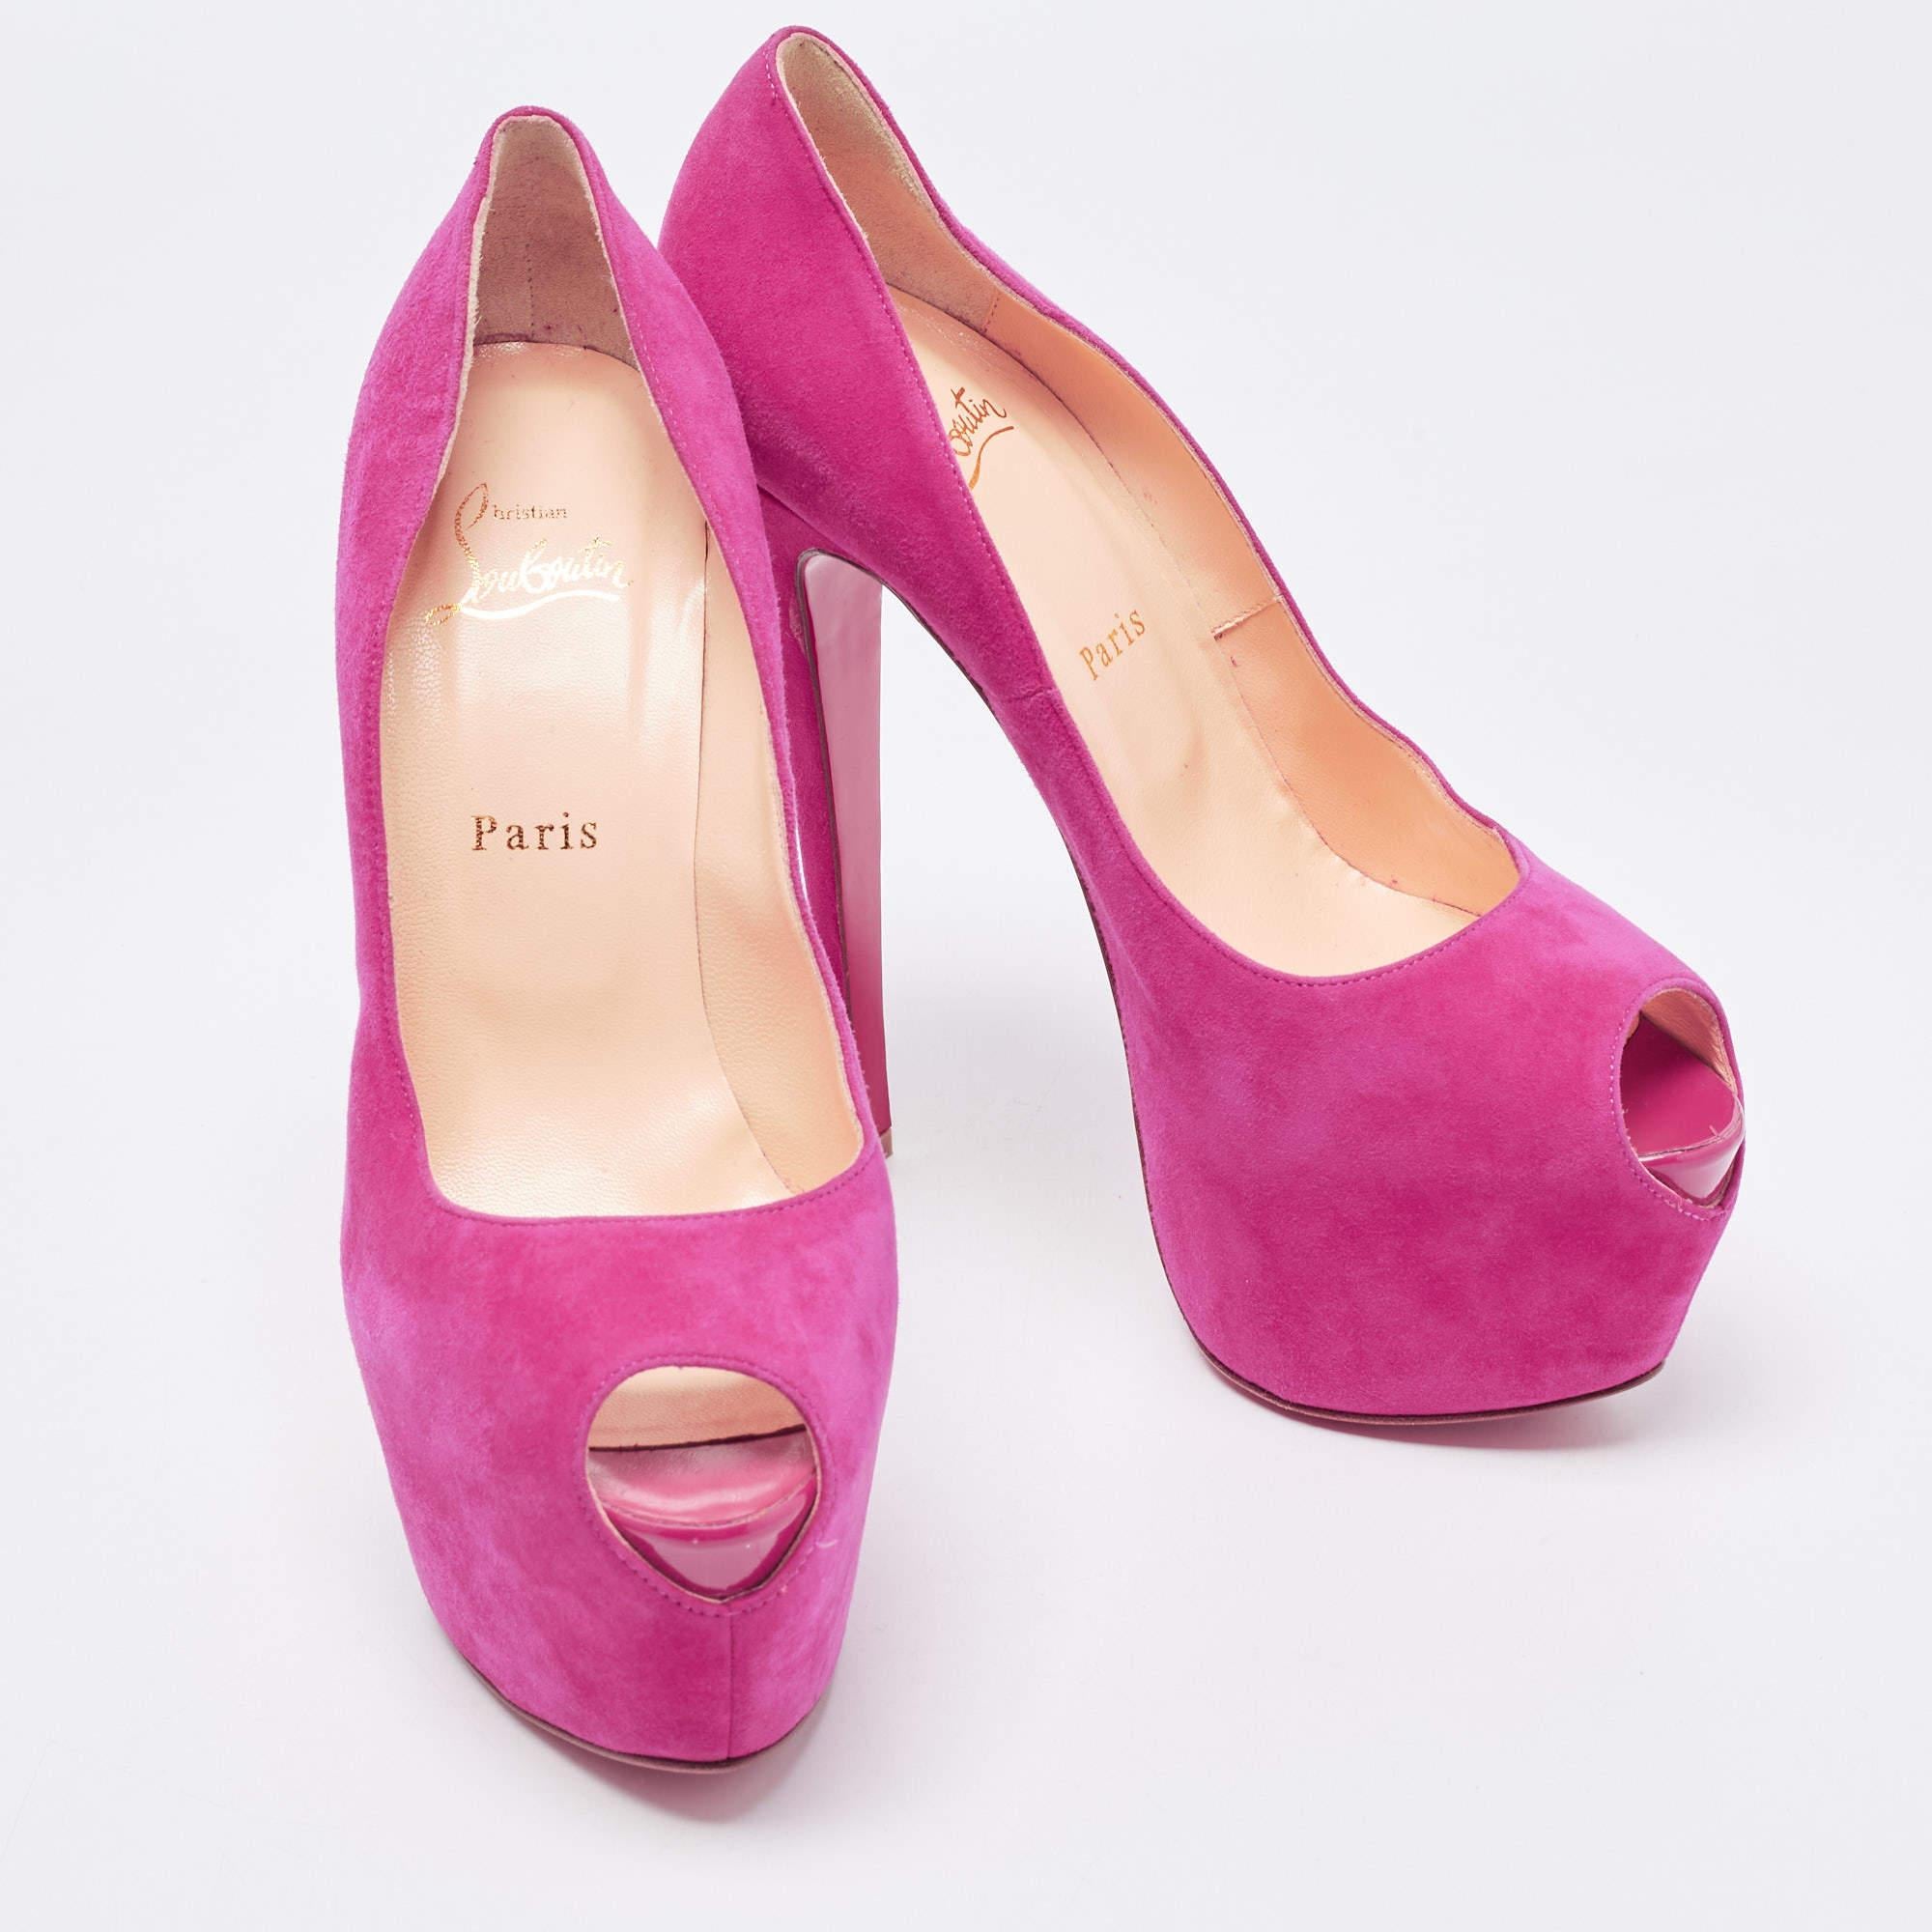 Christian Louboutin Pink Suede Highness Pumps Size 40 3